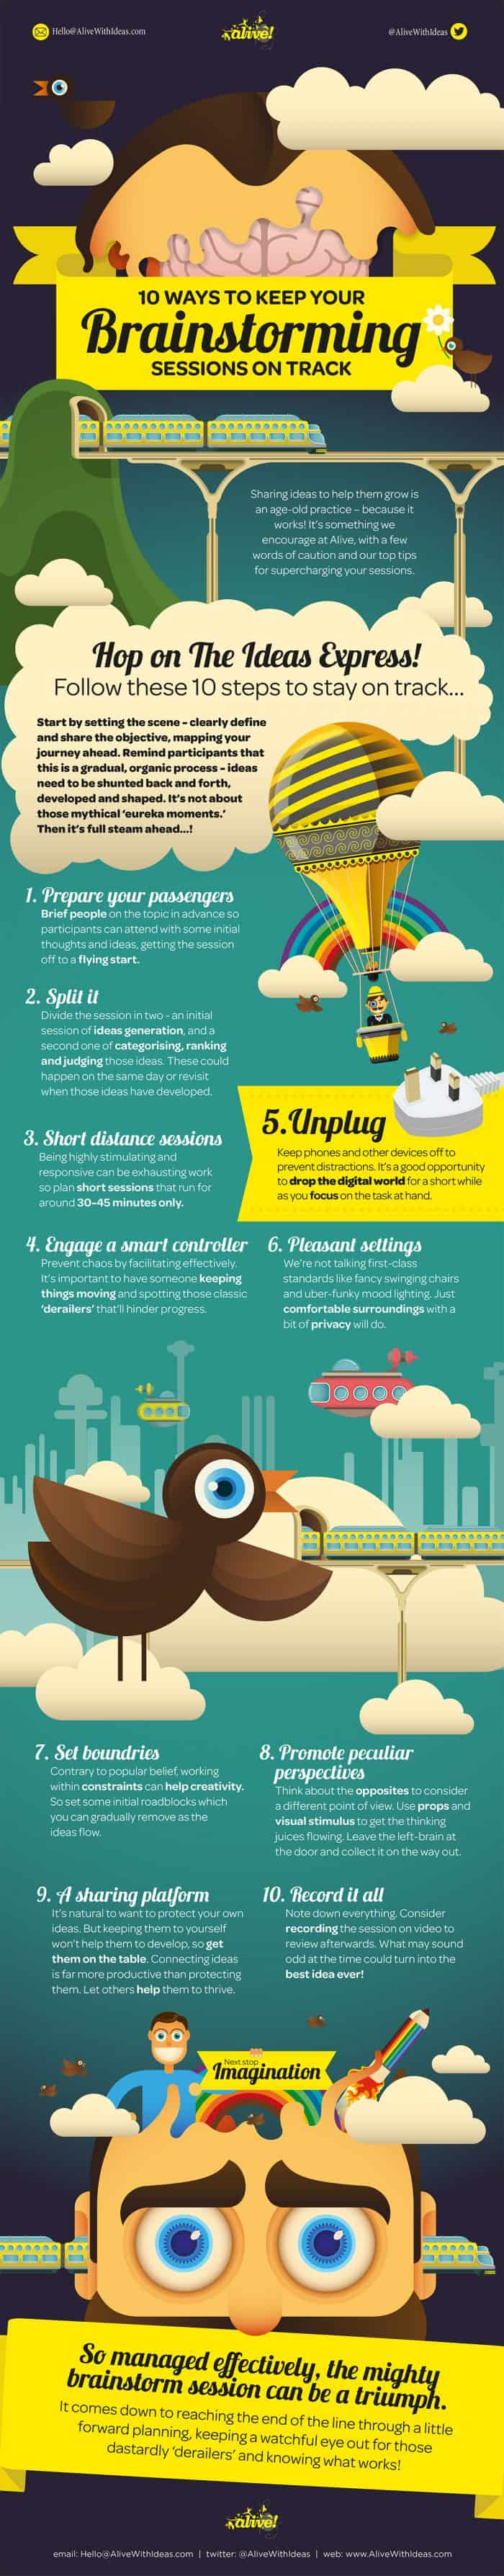 Infographic on how to keep brainstorming sessions effective and without any distractions